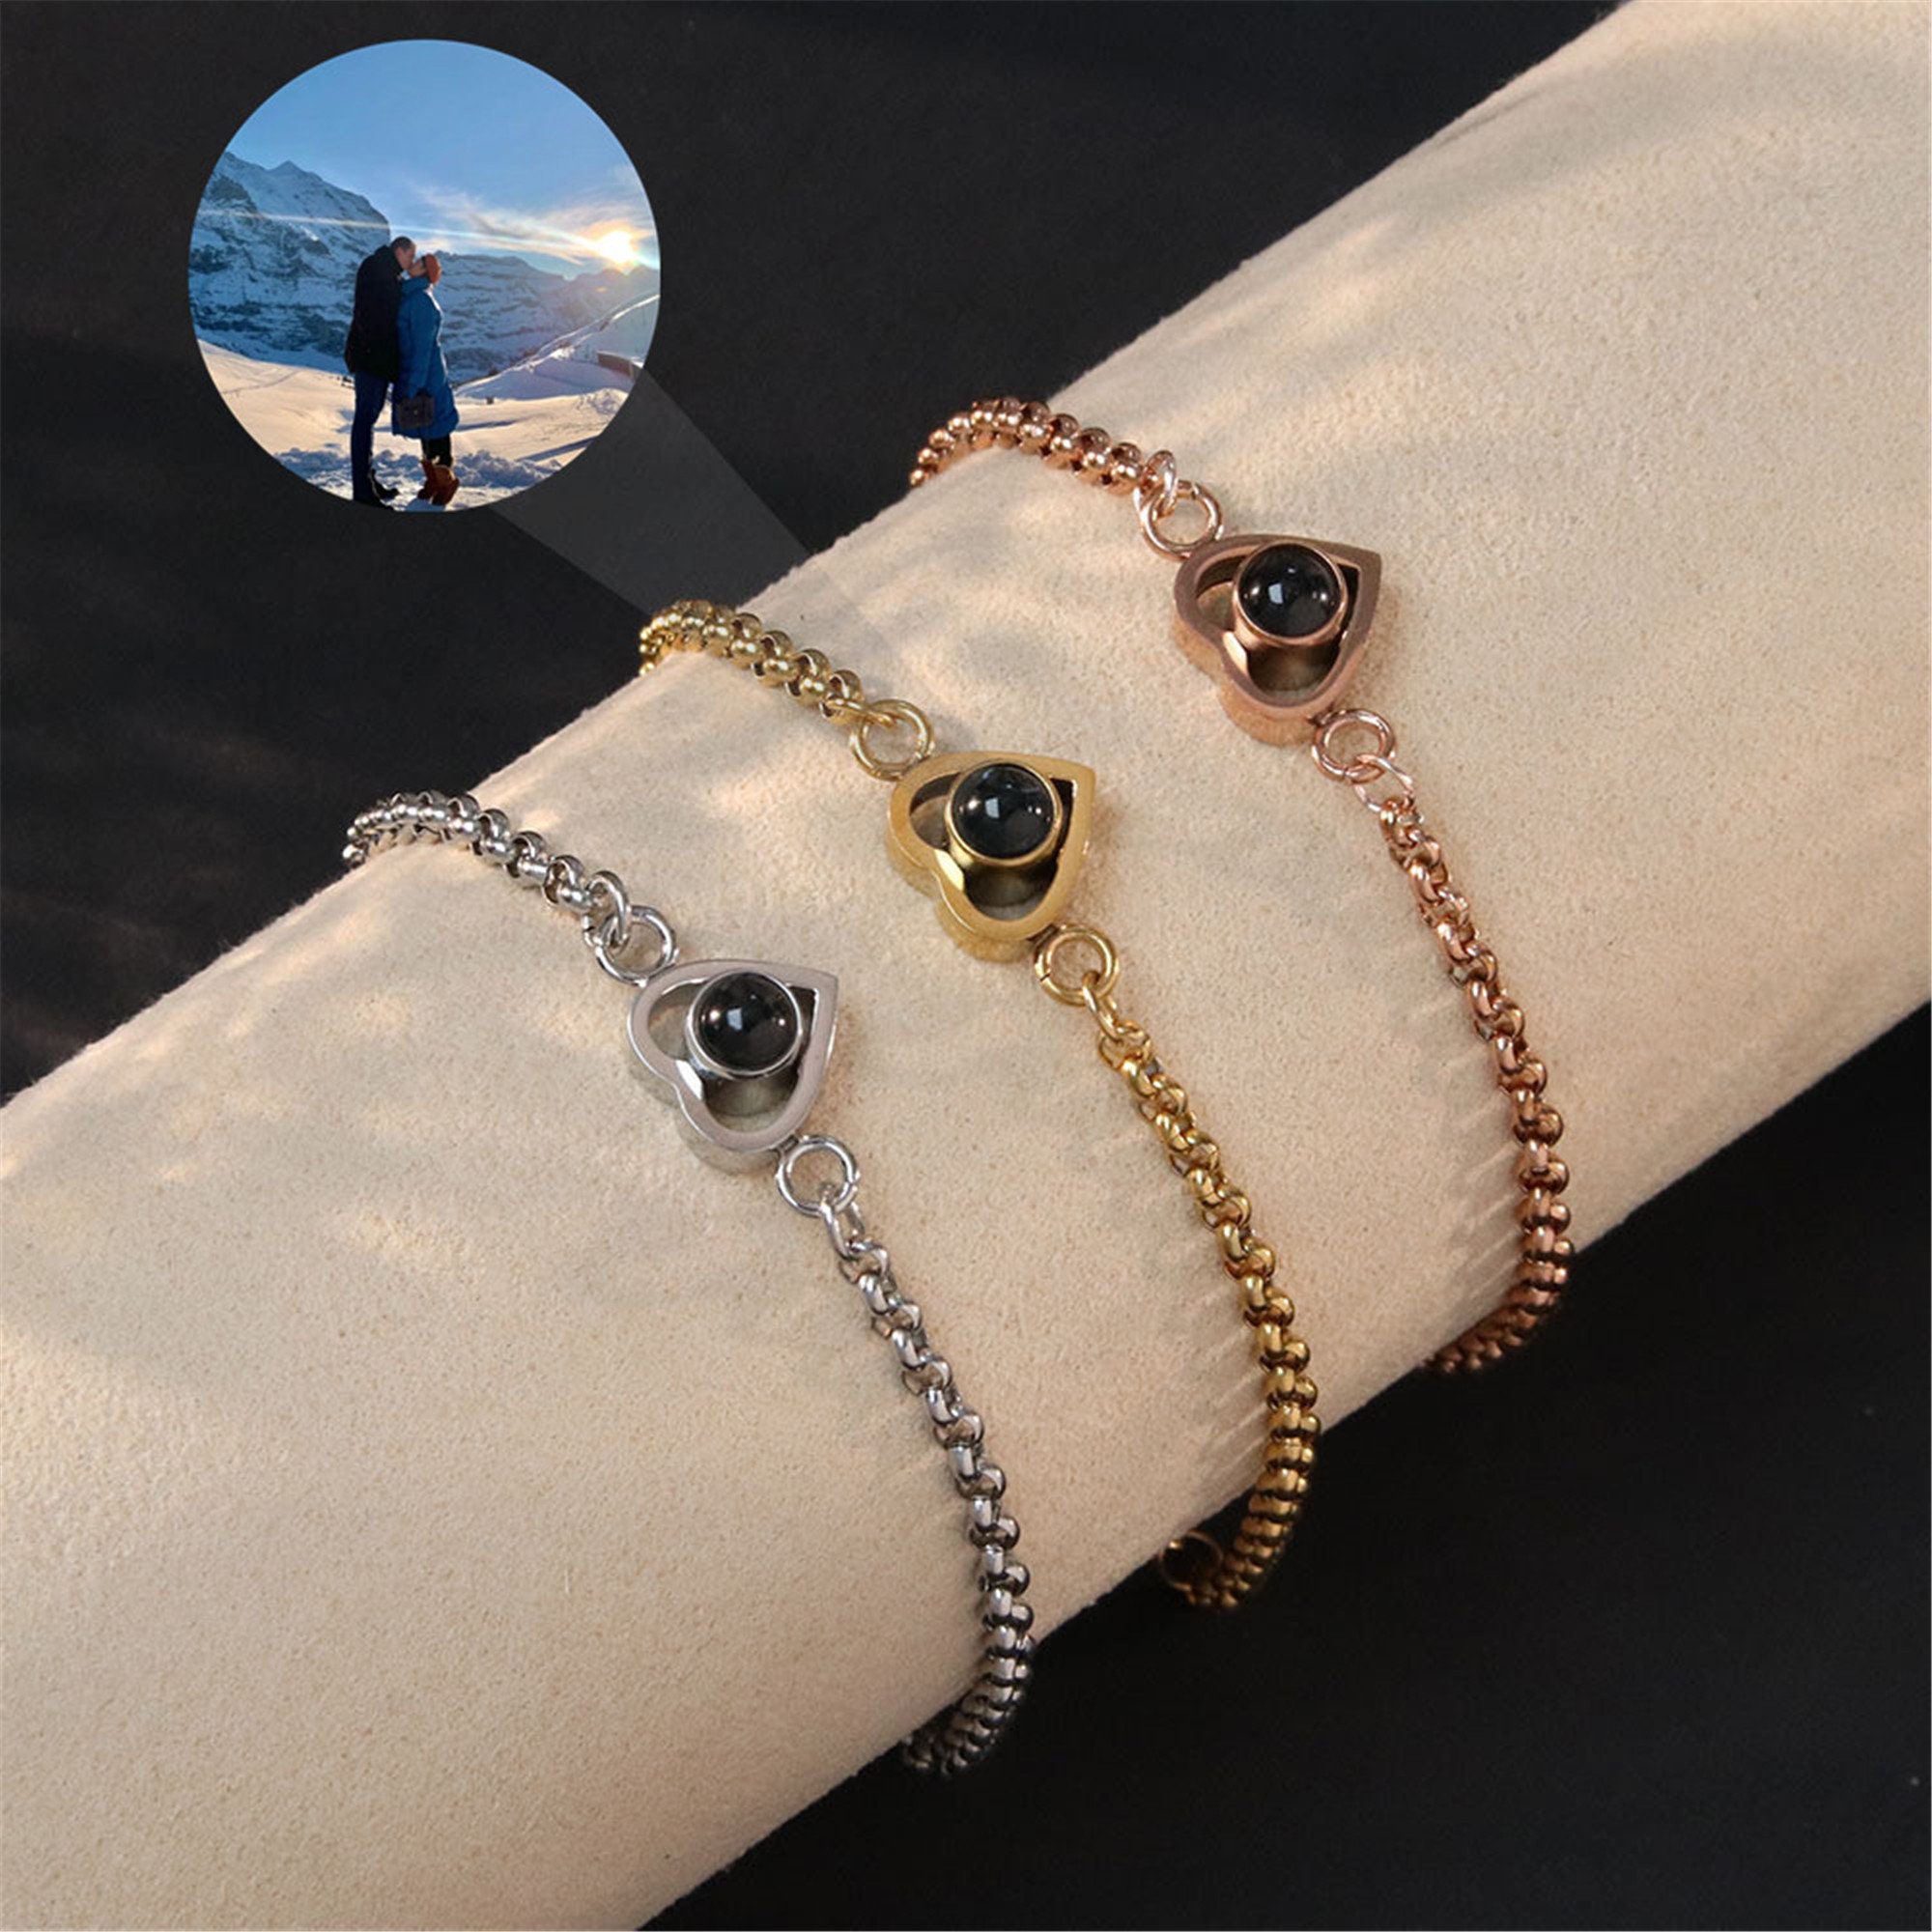 Amazon.com: laveecat Personalized Photo Projection Bracelet Custom Projector  Bracelet with Picture Inside Circle Photo Bracelet for Women Girls:  Clothing, Shoes & Jewelry